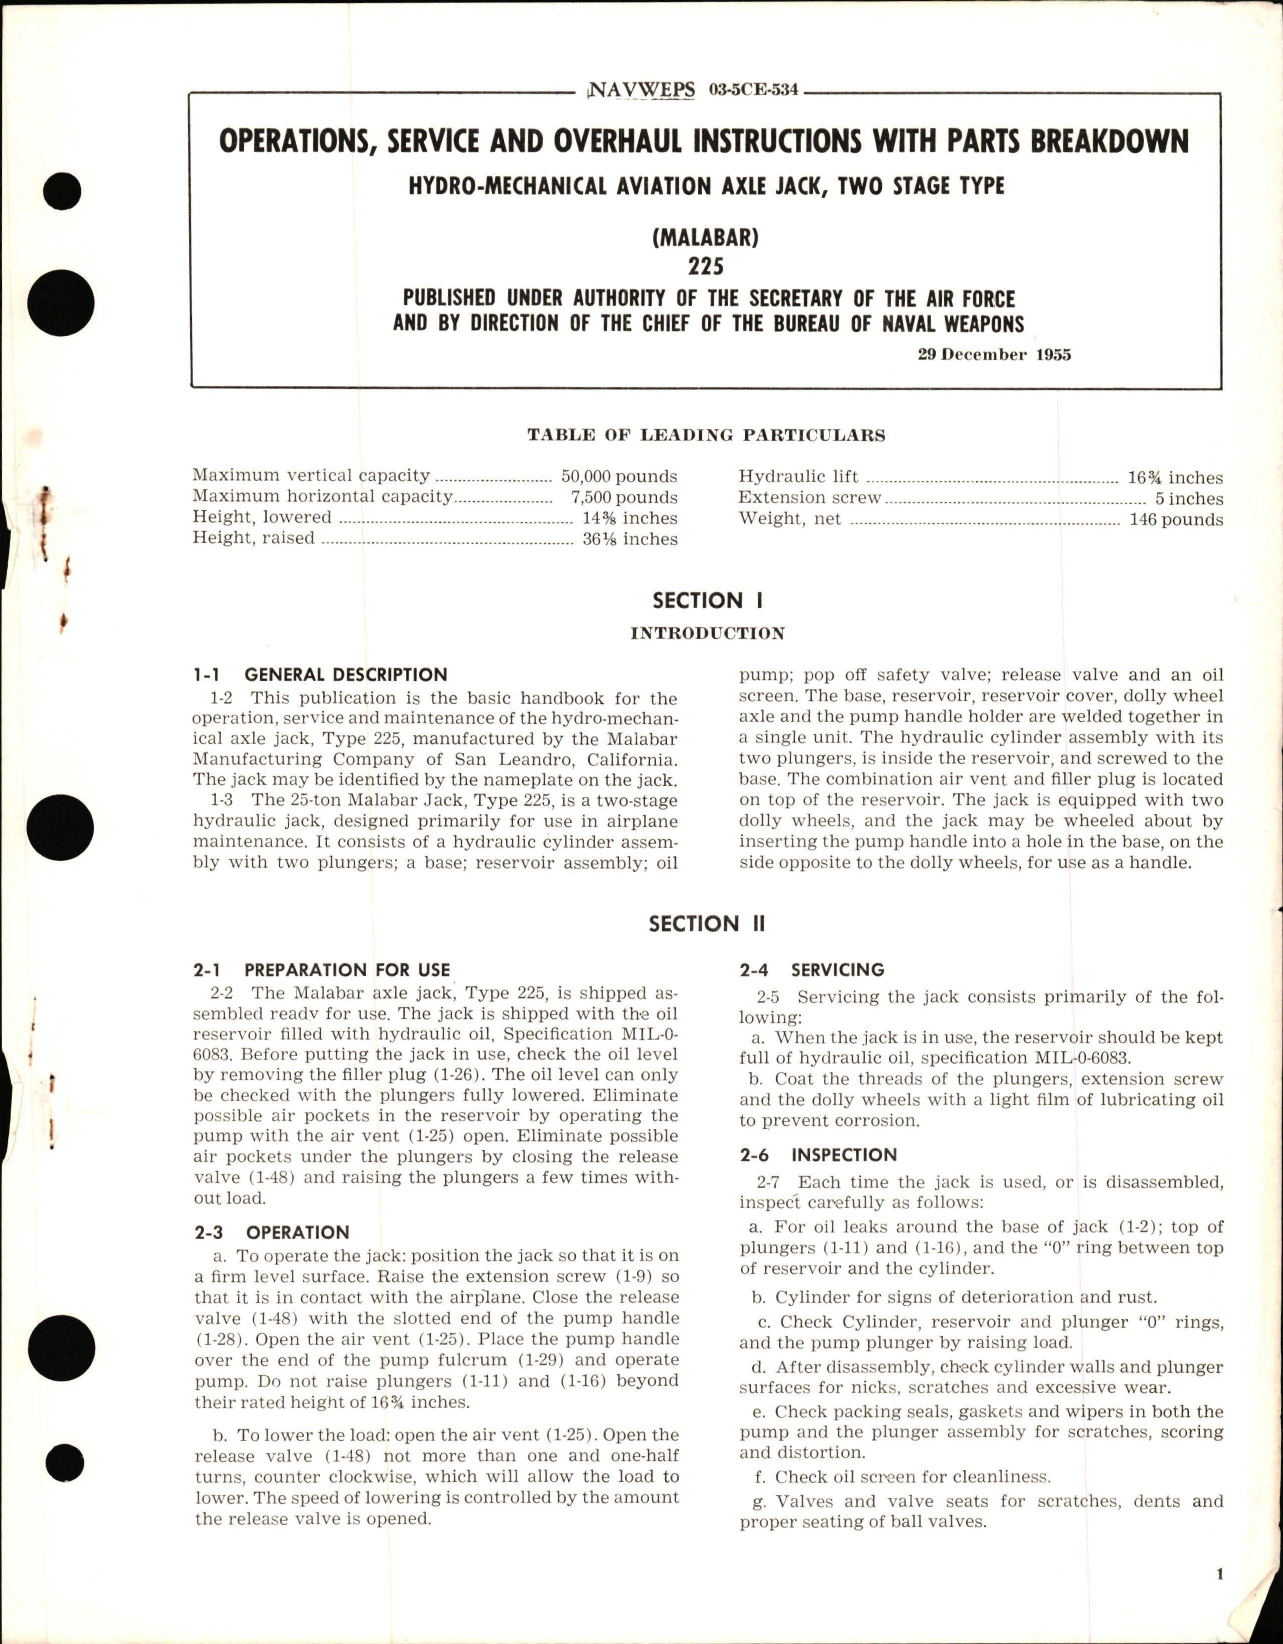 Sample page 1 from AirCorps Library document: Operation, Service, and Overhaul Instructions with Parts Breakdown for Hydro Mechanical Aviation Axle Jack, Two Stage Type 225